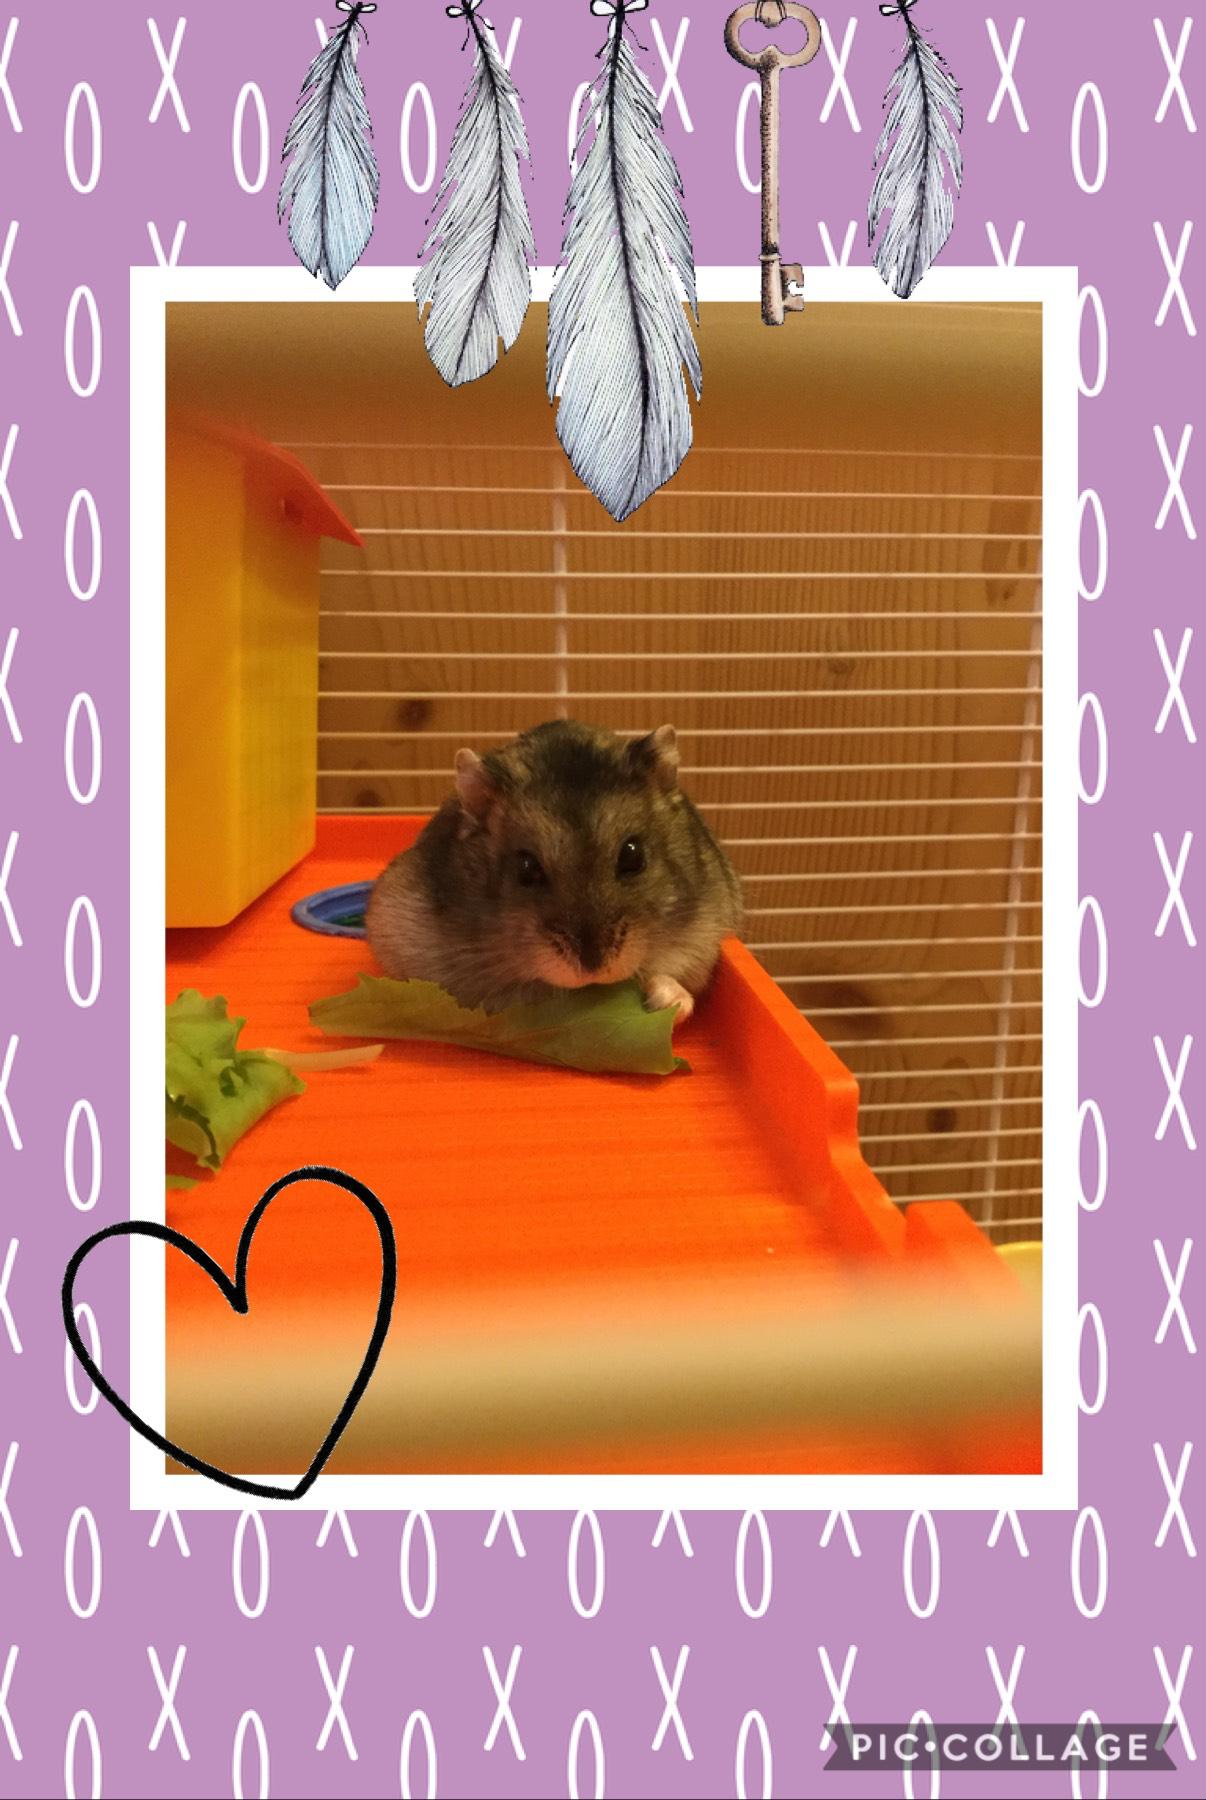 My hamster 🥰🥰 His name is Otto💚